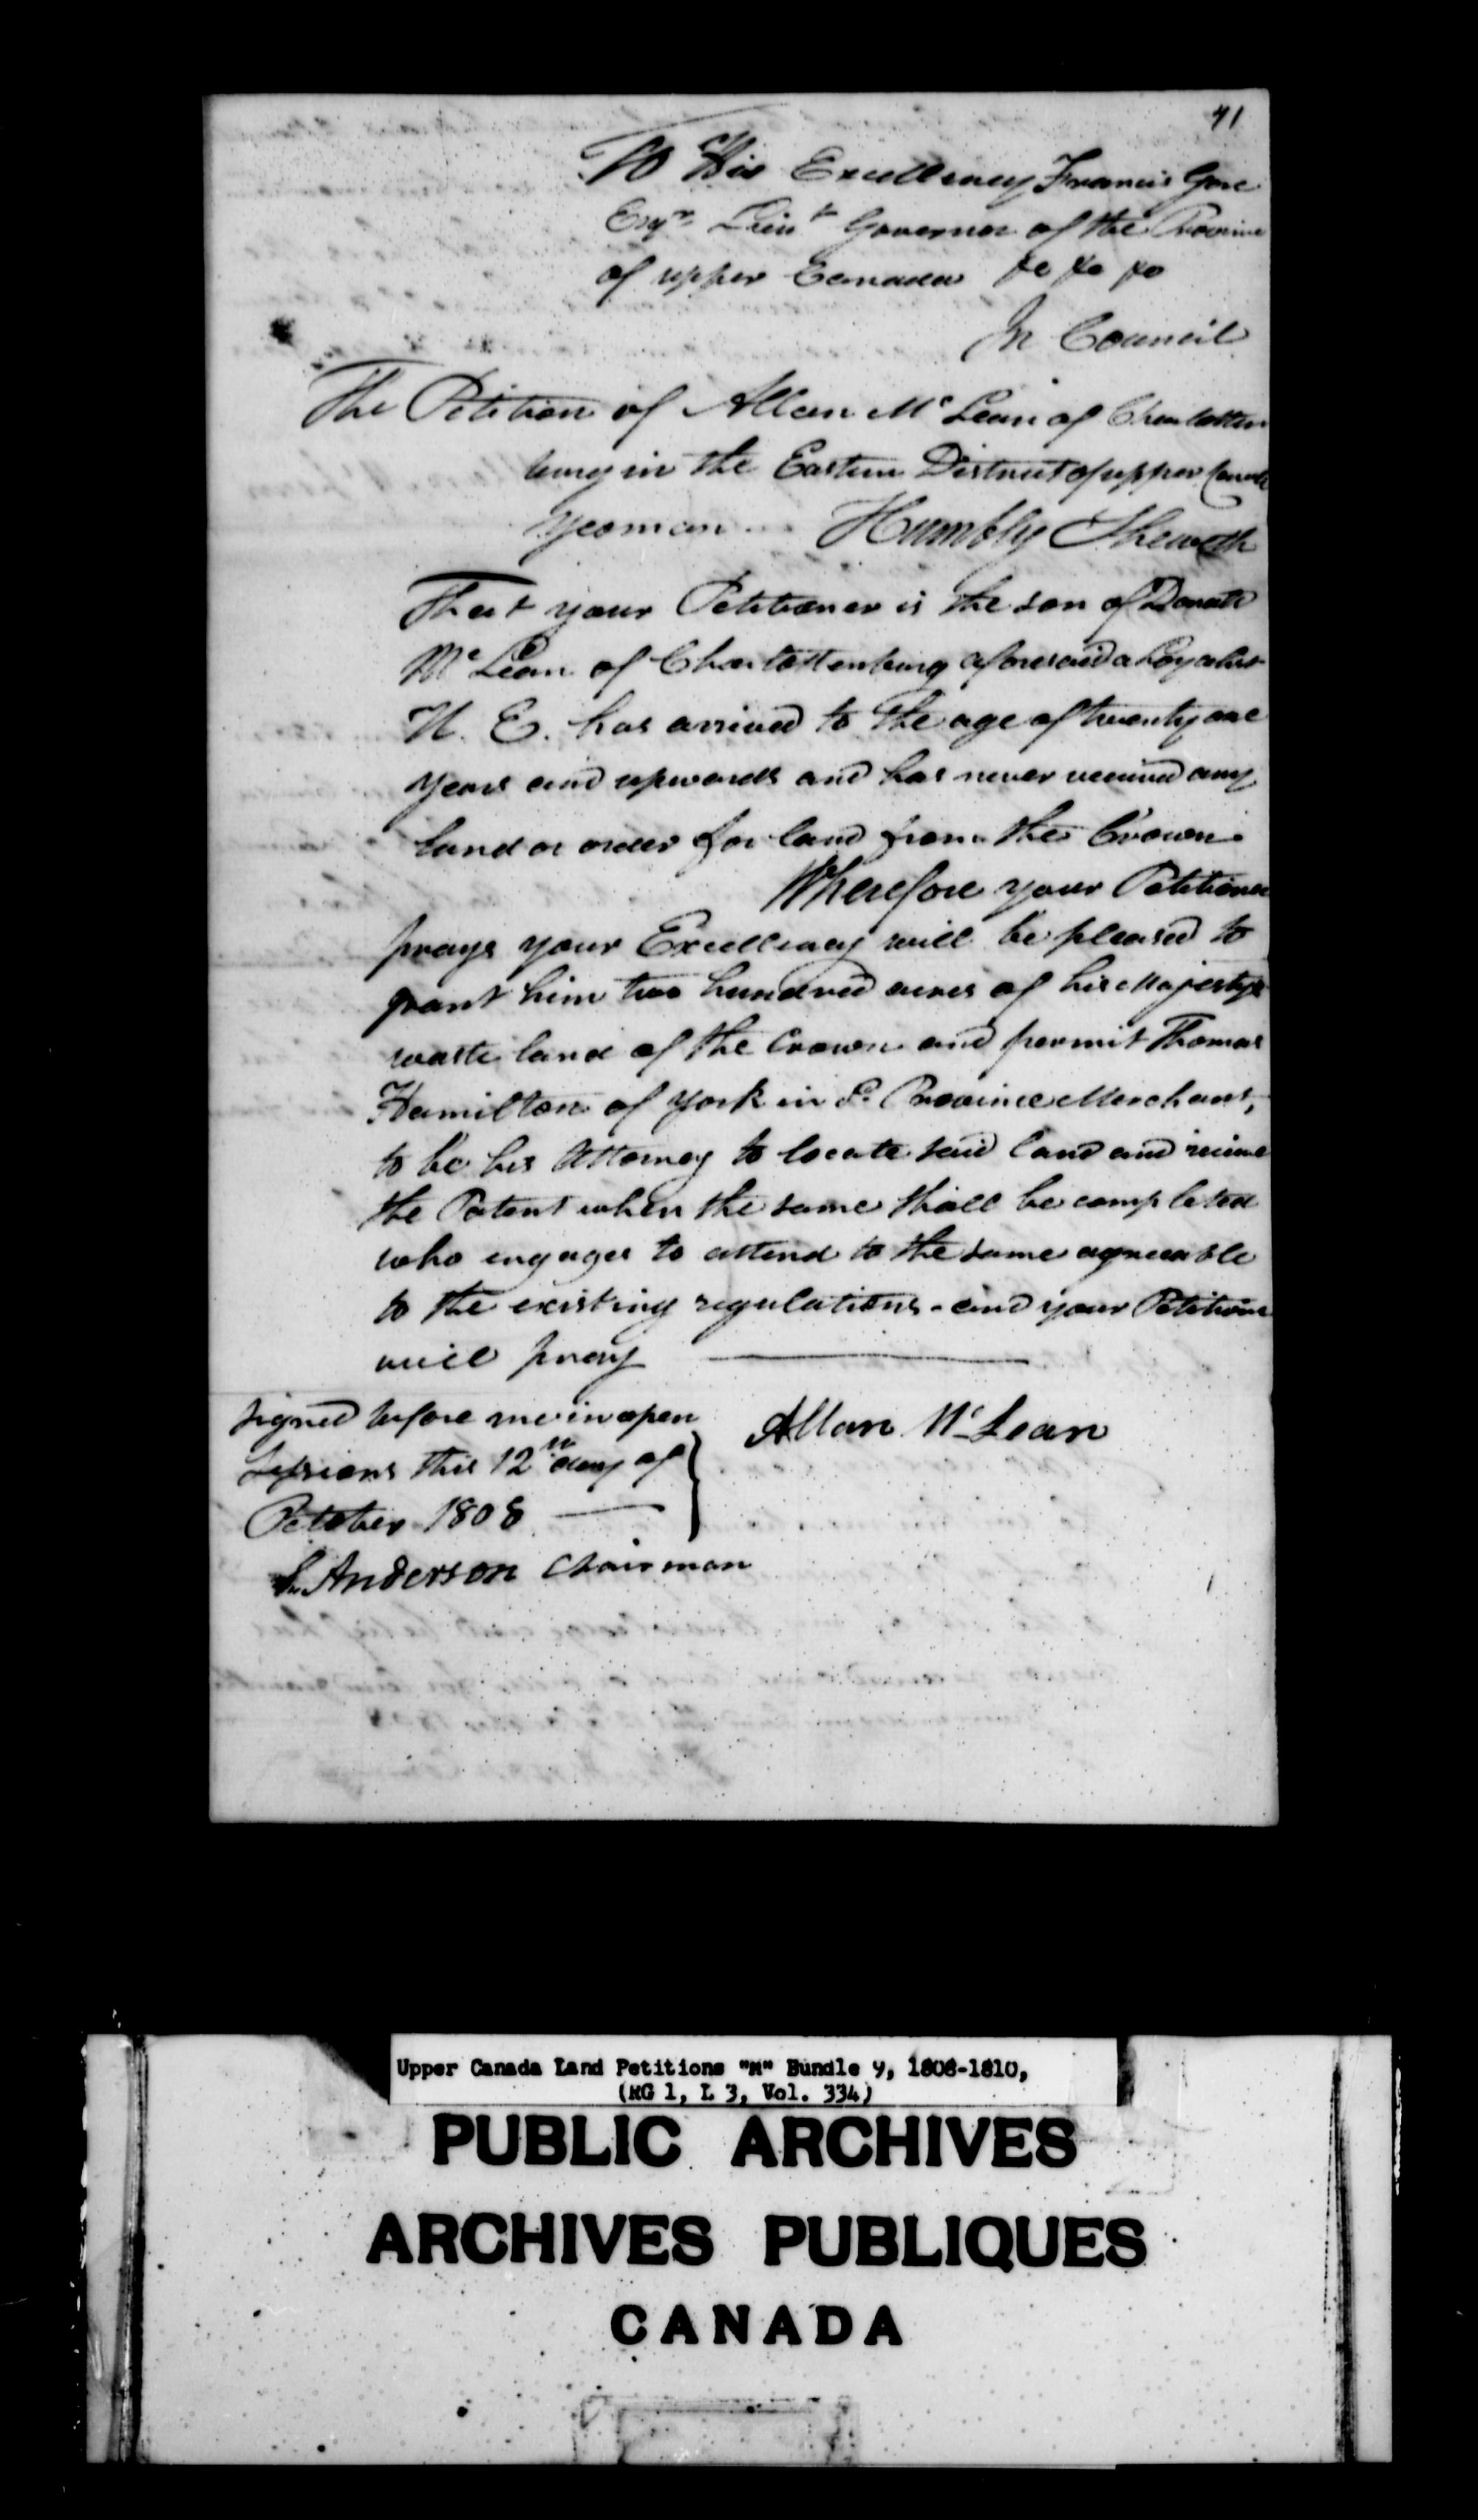 Title: Upper Canada Land Petitions (1763-1865) - Mikan Number: 205131 - Microform: c-2196